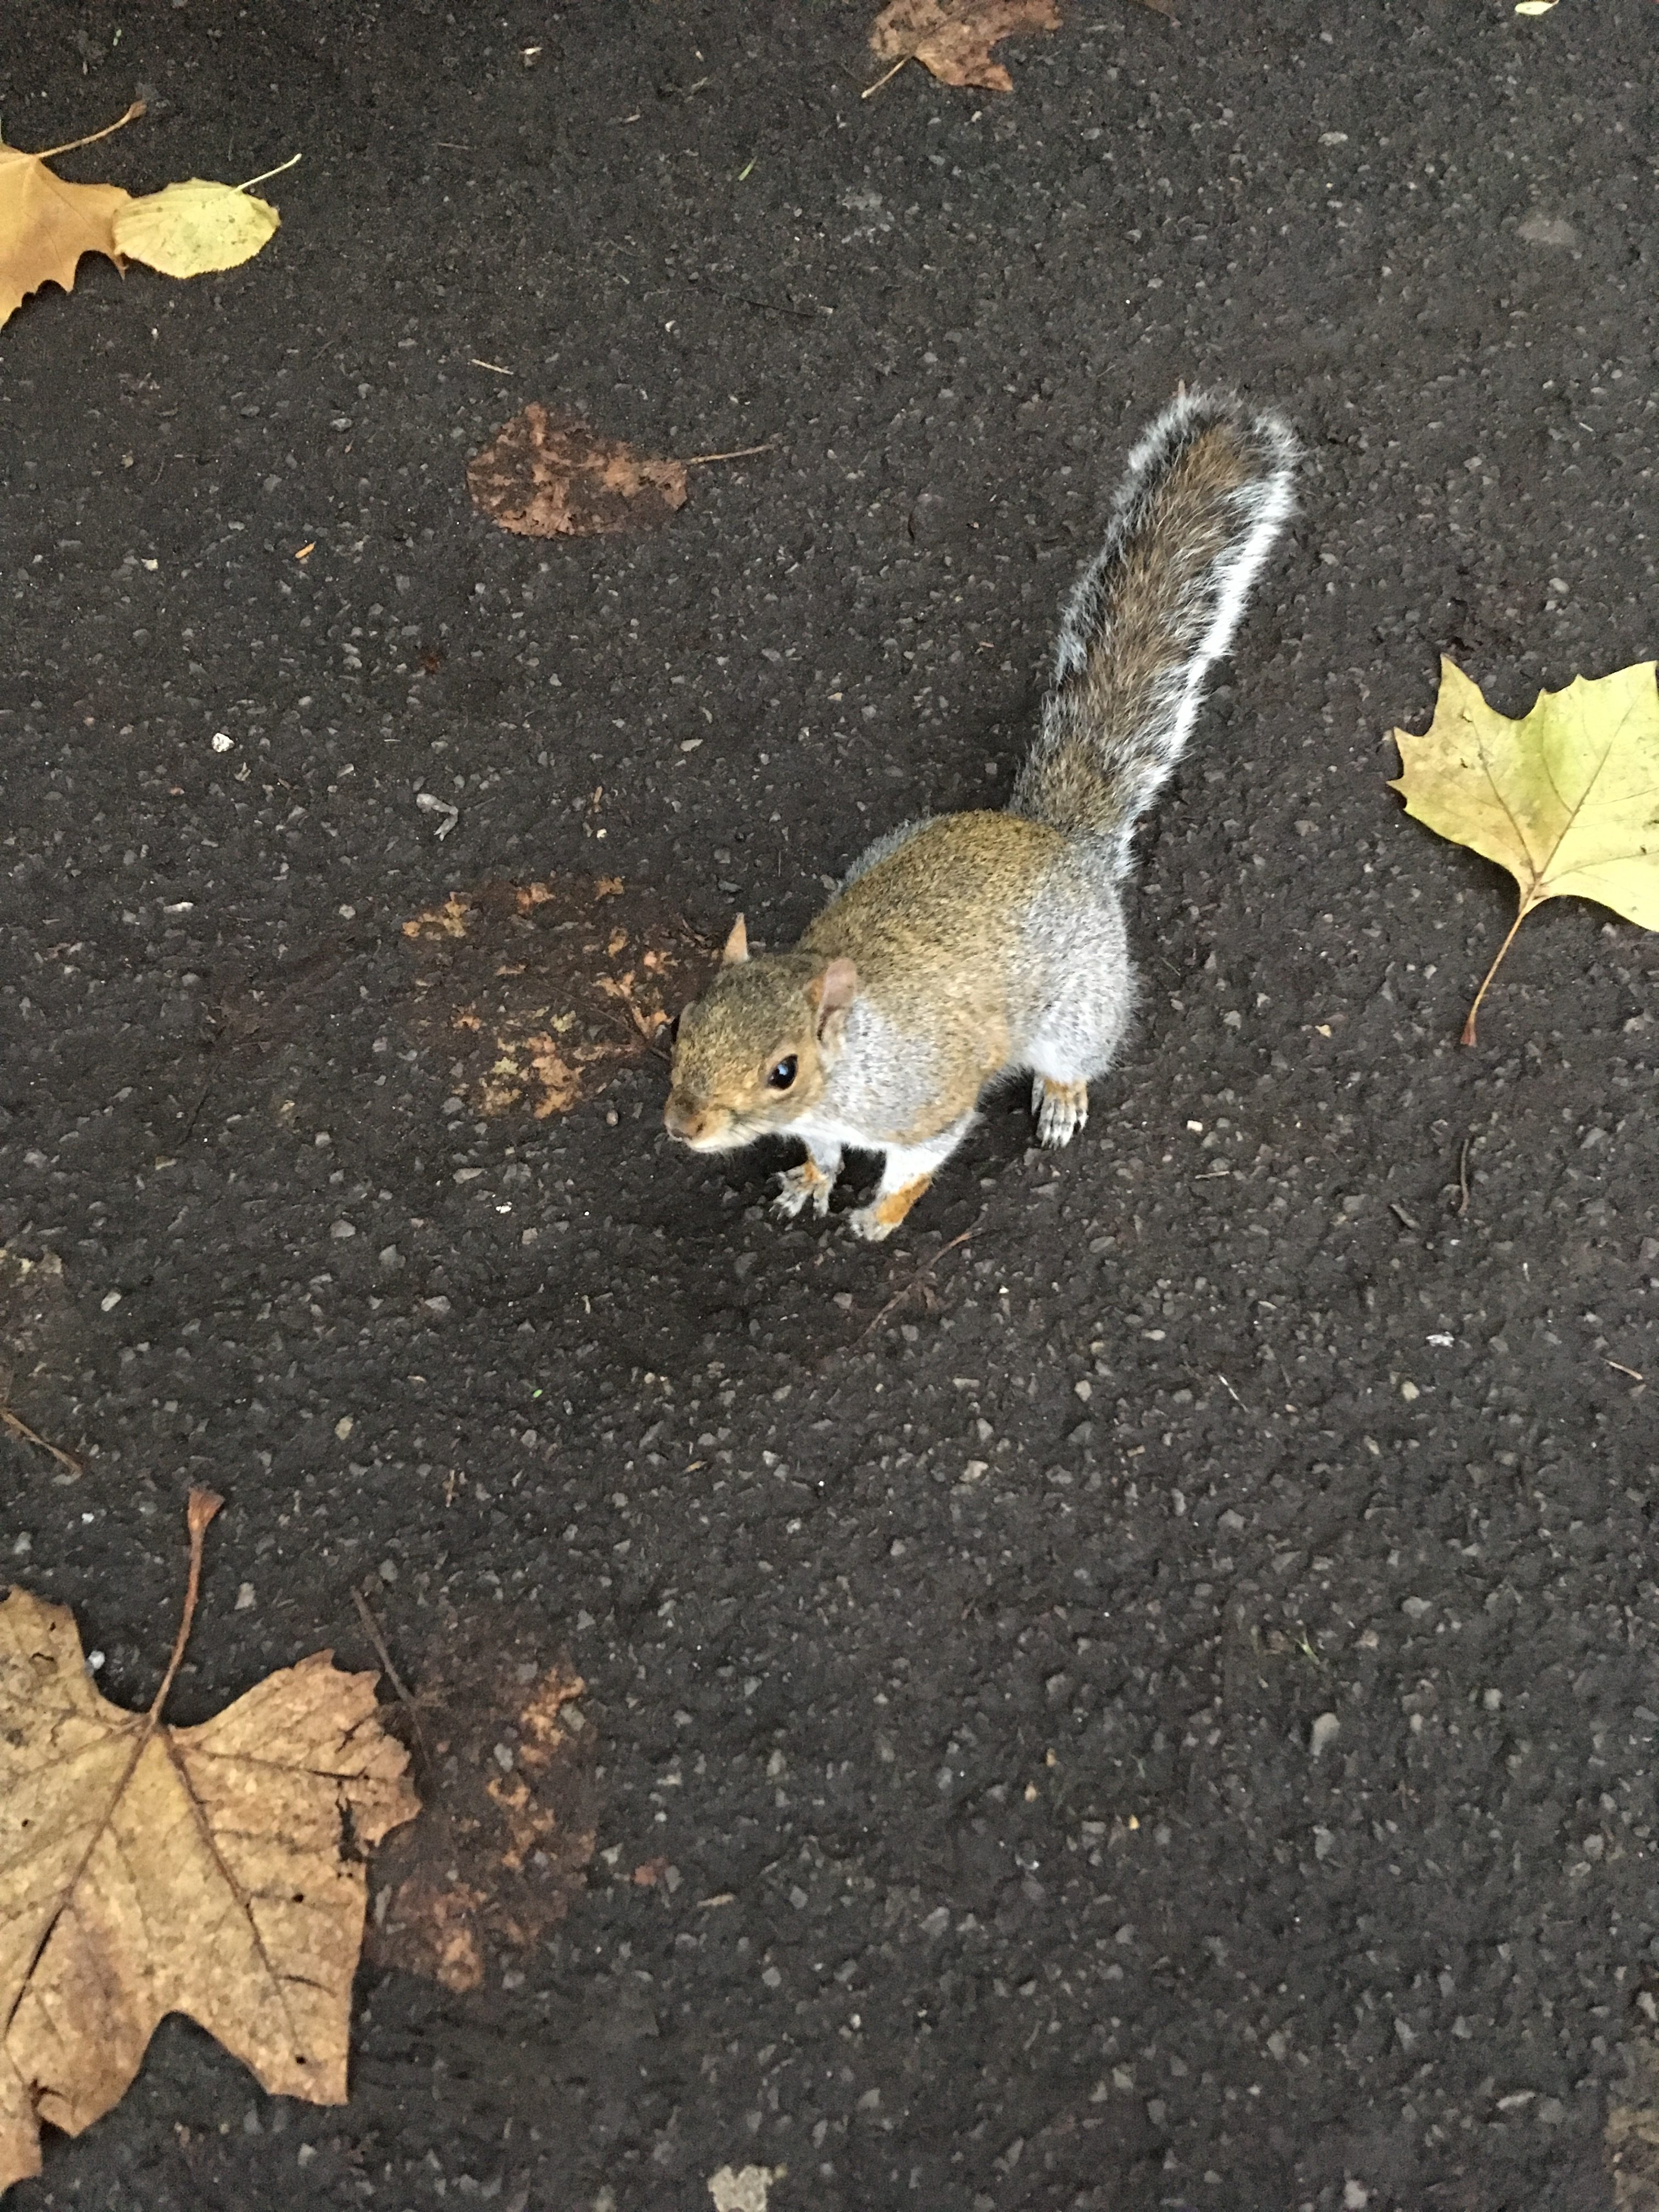 An up close photo I took on my walk of a squirrel.